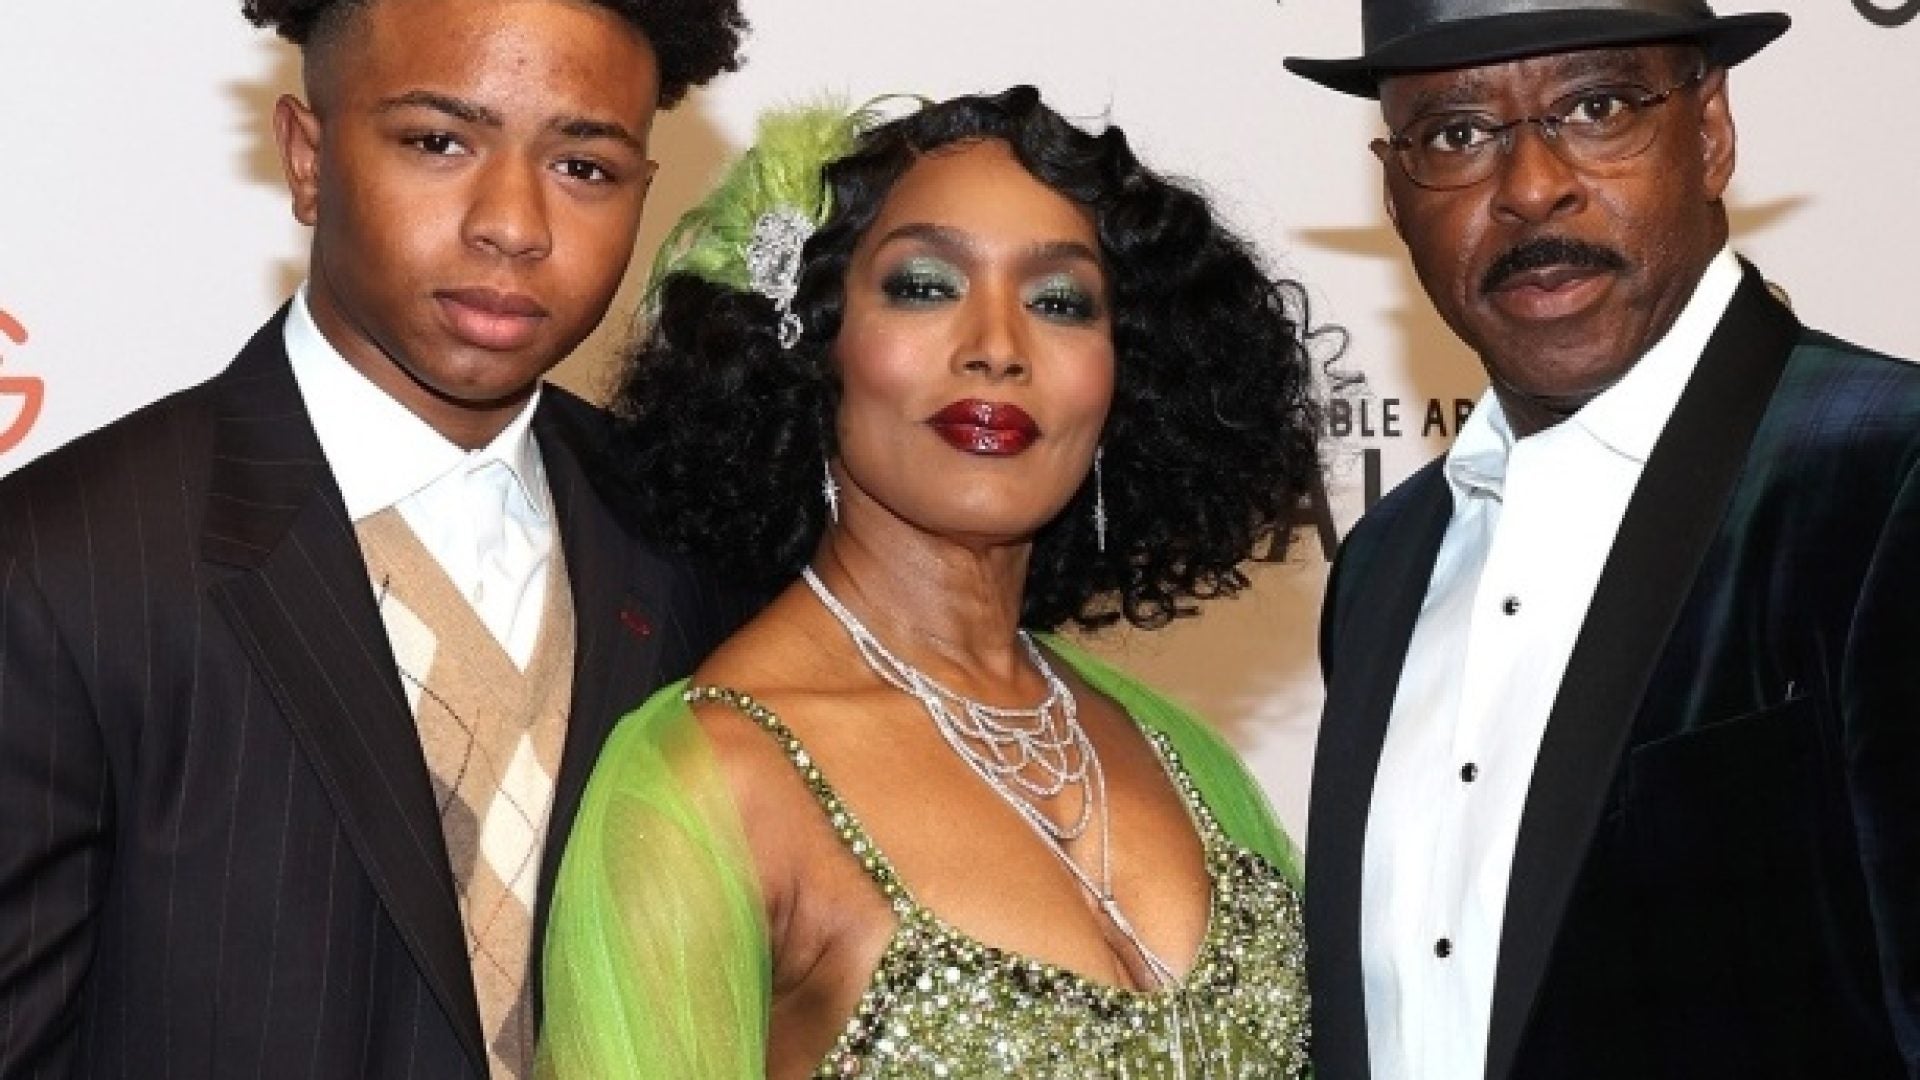 Angela Bassett And Courtney Vance’s Teen Son Gives An Apology For Participating In Celeb Death TikTok Trend